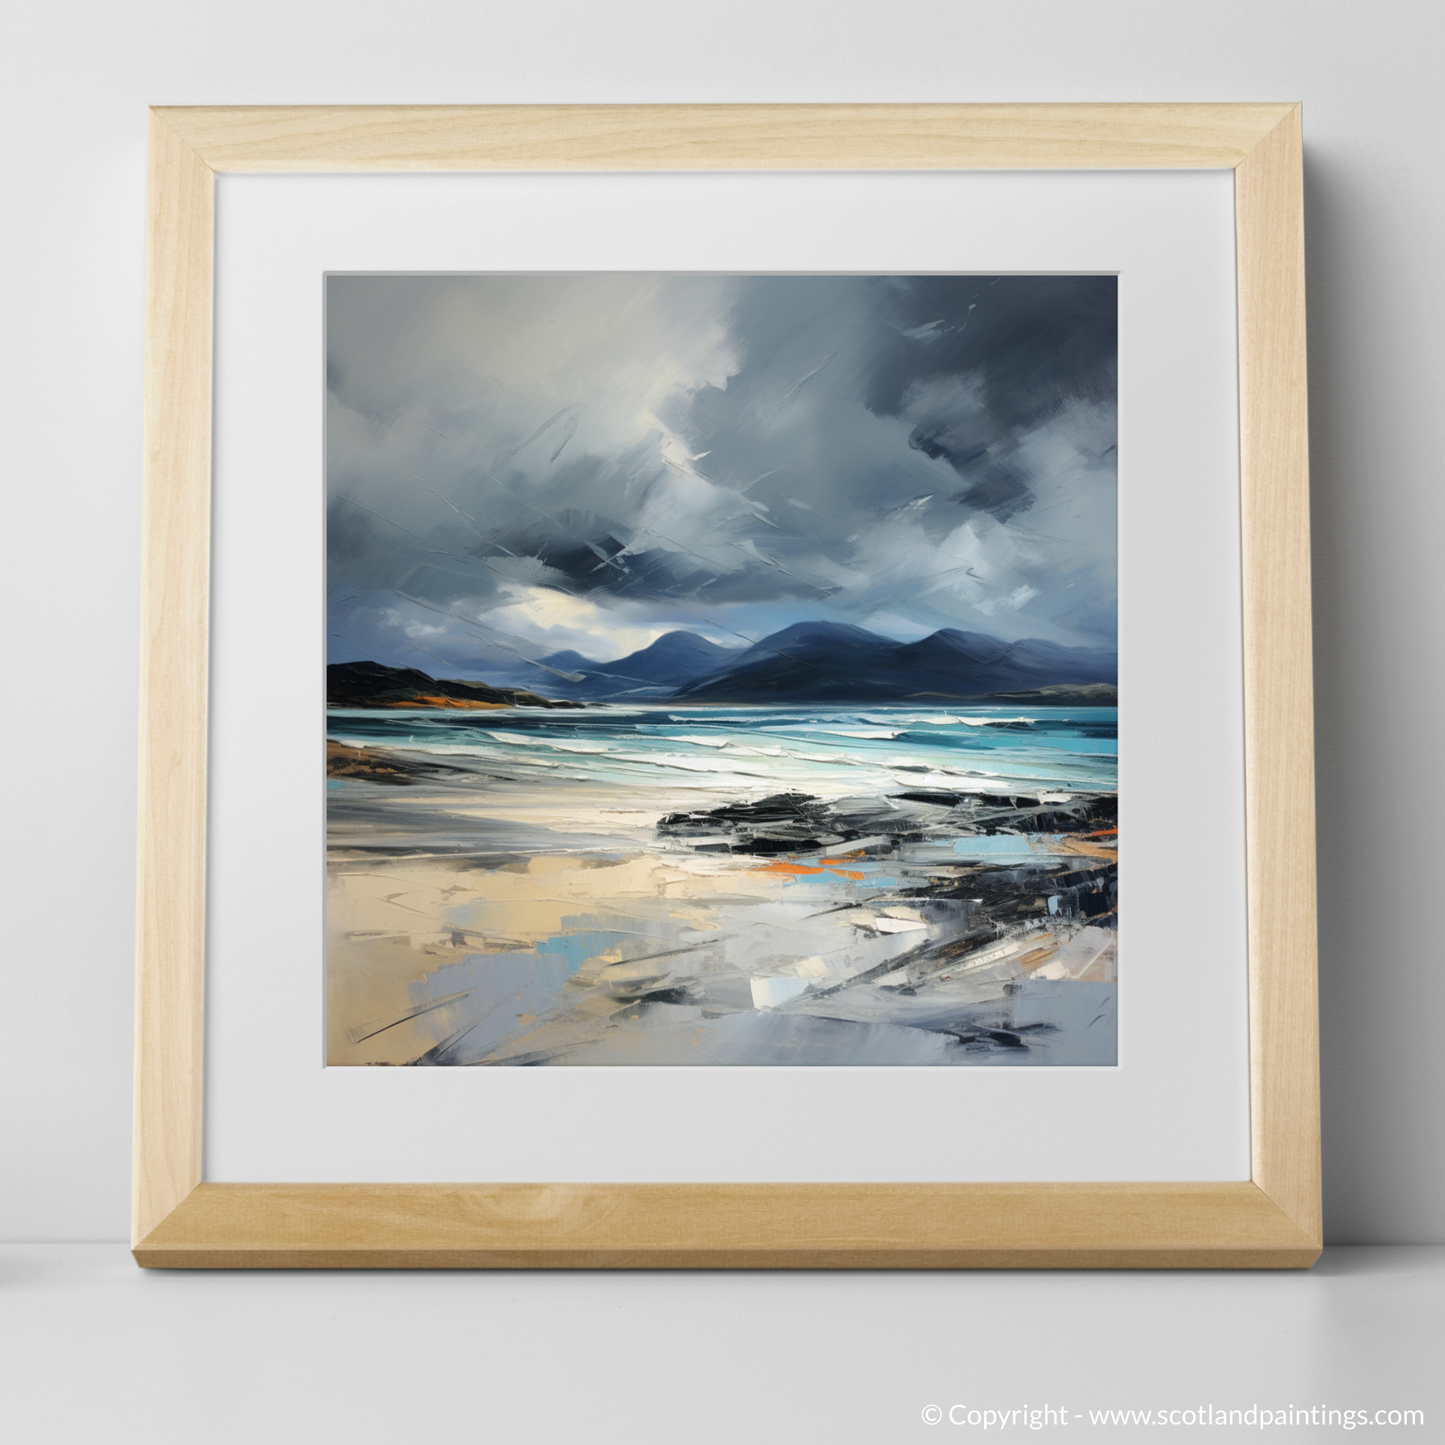 Tempest of Camusdarach: An Abstract Impressionist Journey